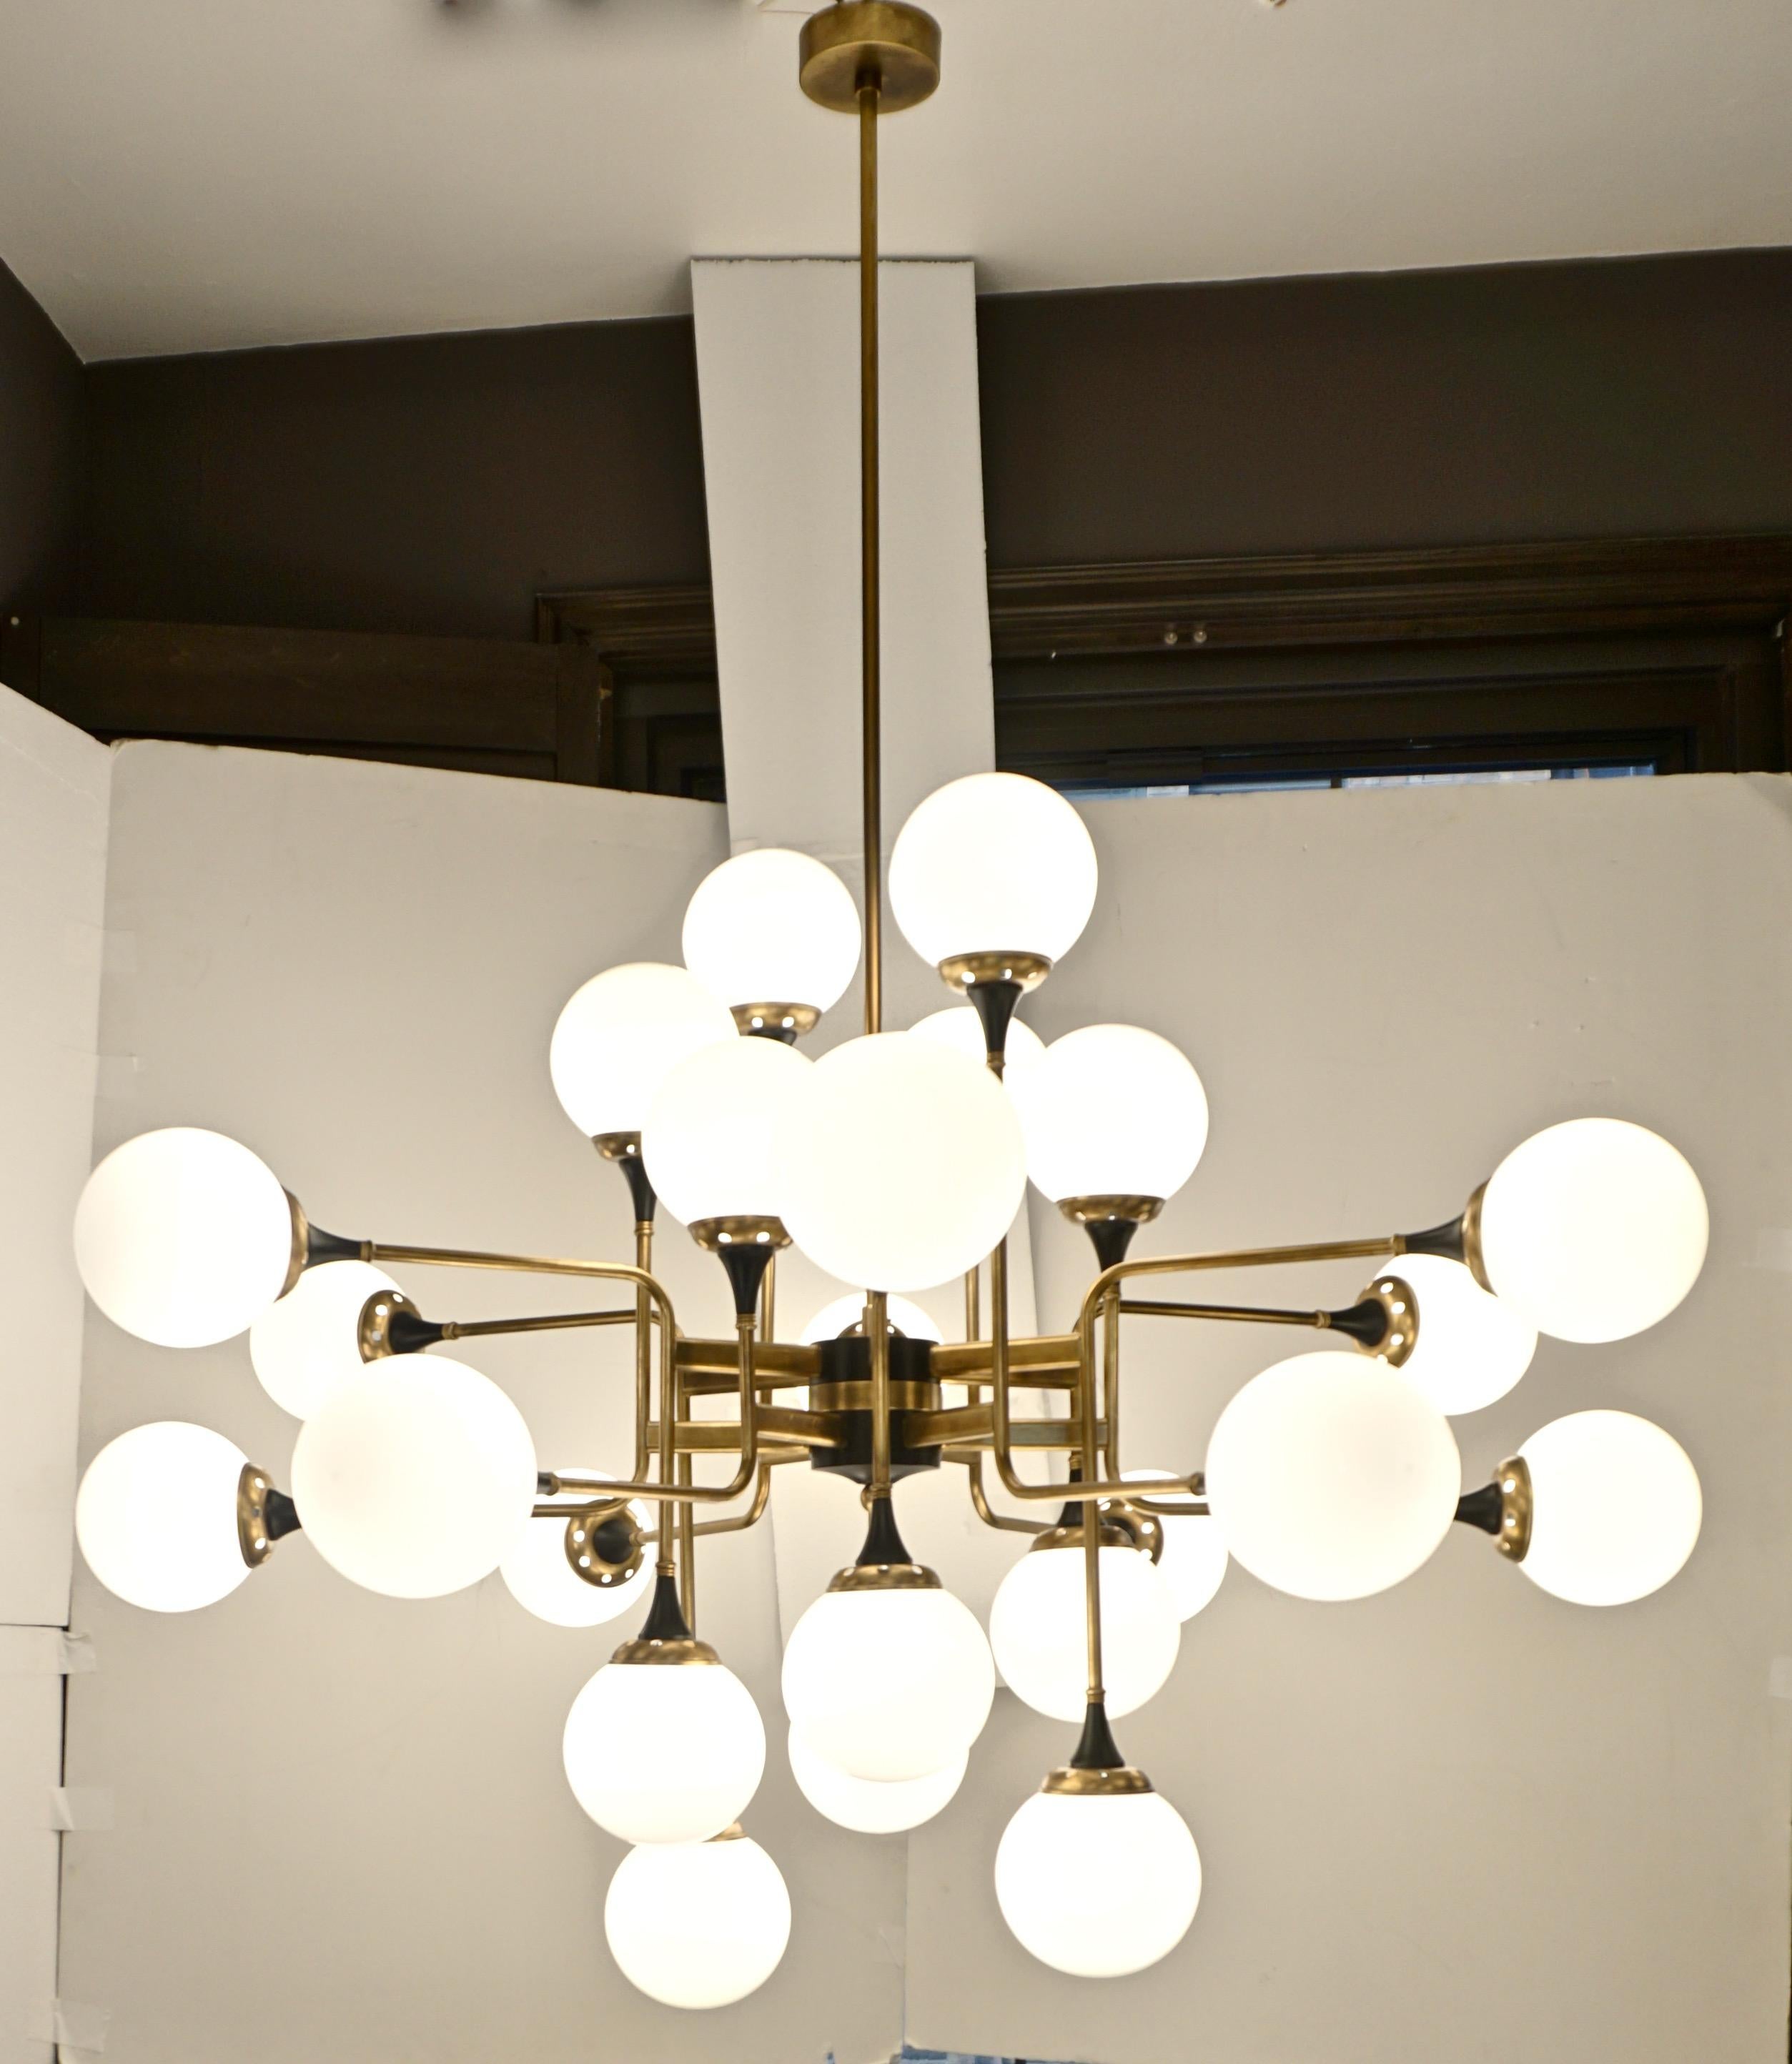 Contemporary custom made chandelier of grand scale and Mid-Century Modern geometric design with a Sputnik inspiration, entirely handcrafted in Italy. The brass structure with a vintage finish is composed of 12 asymmetric bent arms to support 24